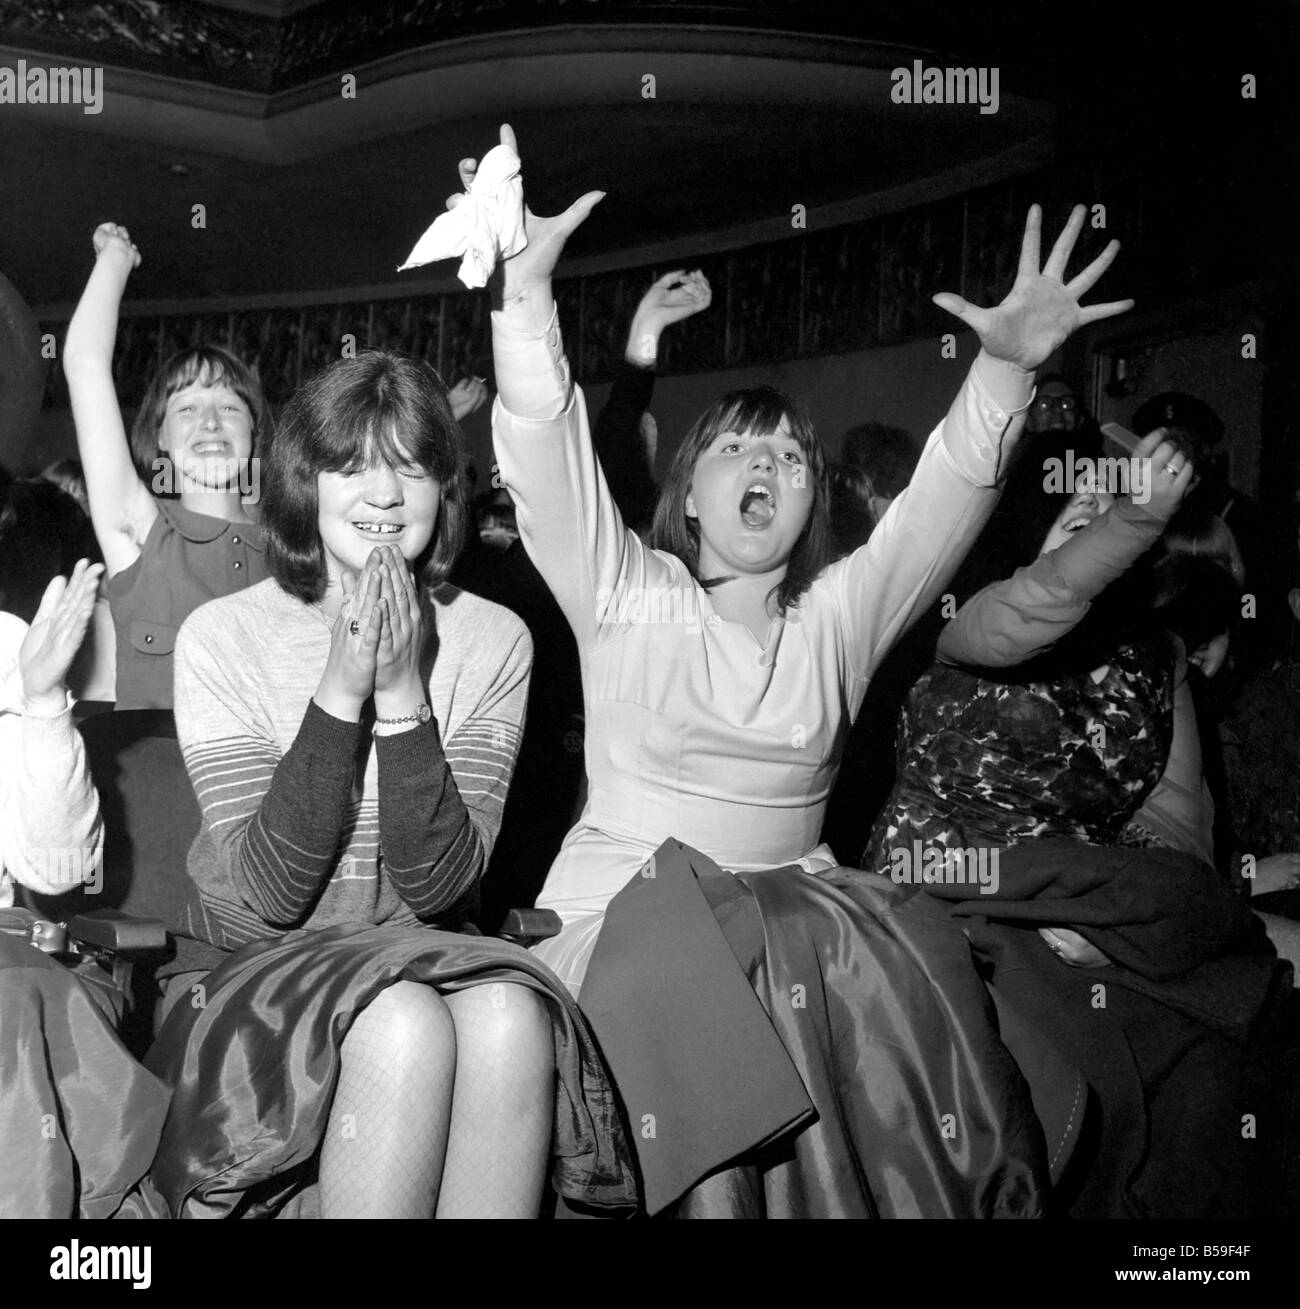 Screaming Girl Fans Greet The Beatles On Their Appearance At The Abc Cinema In Edinburgh October 1964 S092 002 Stock Photo Alamy